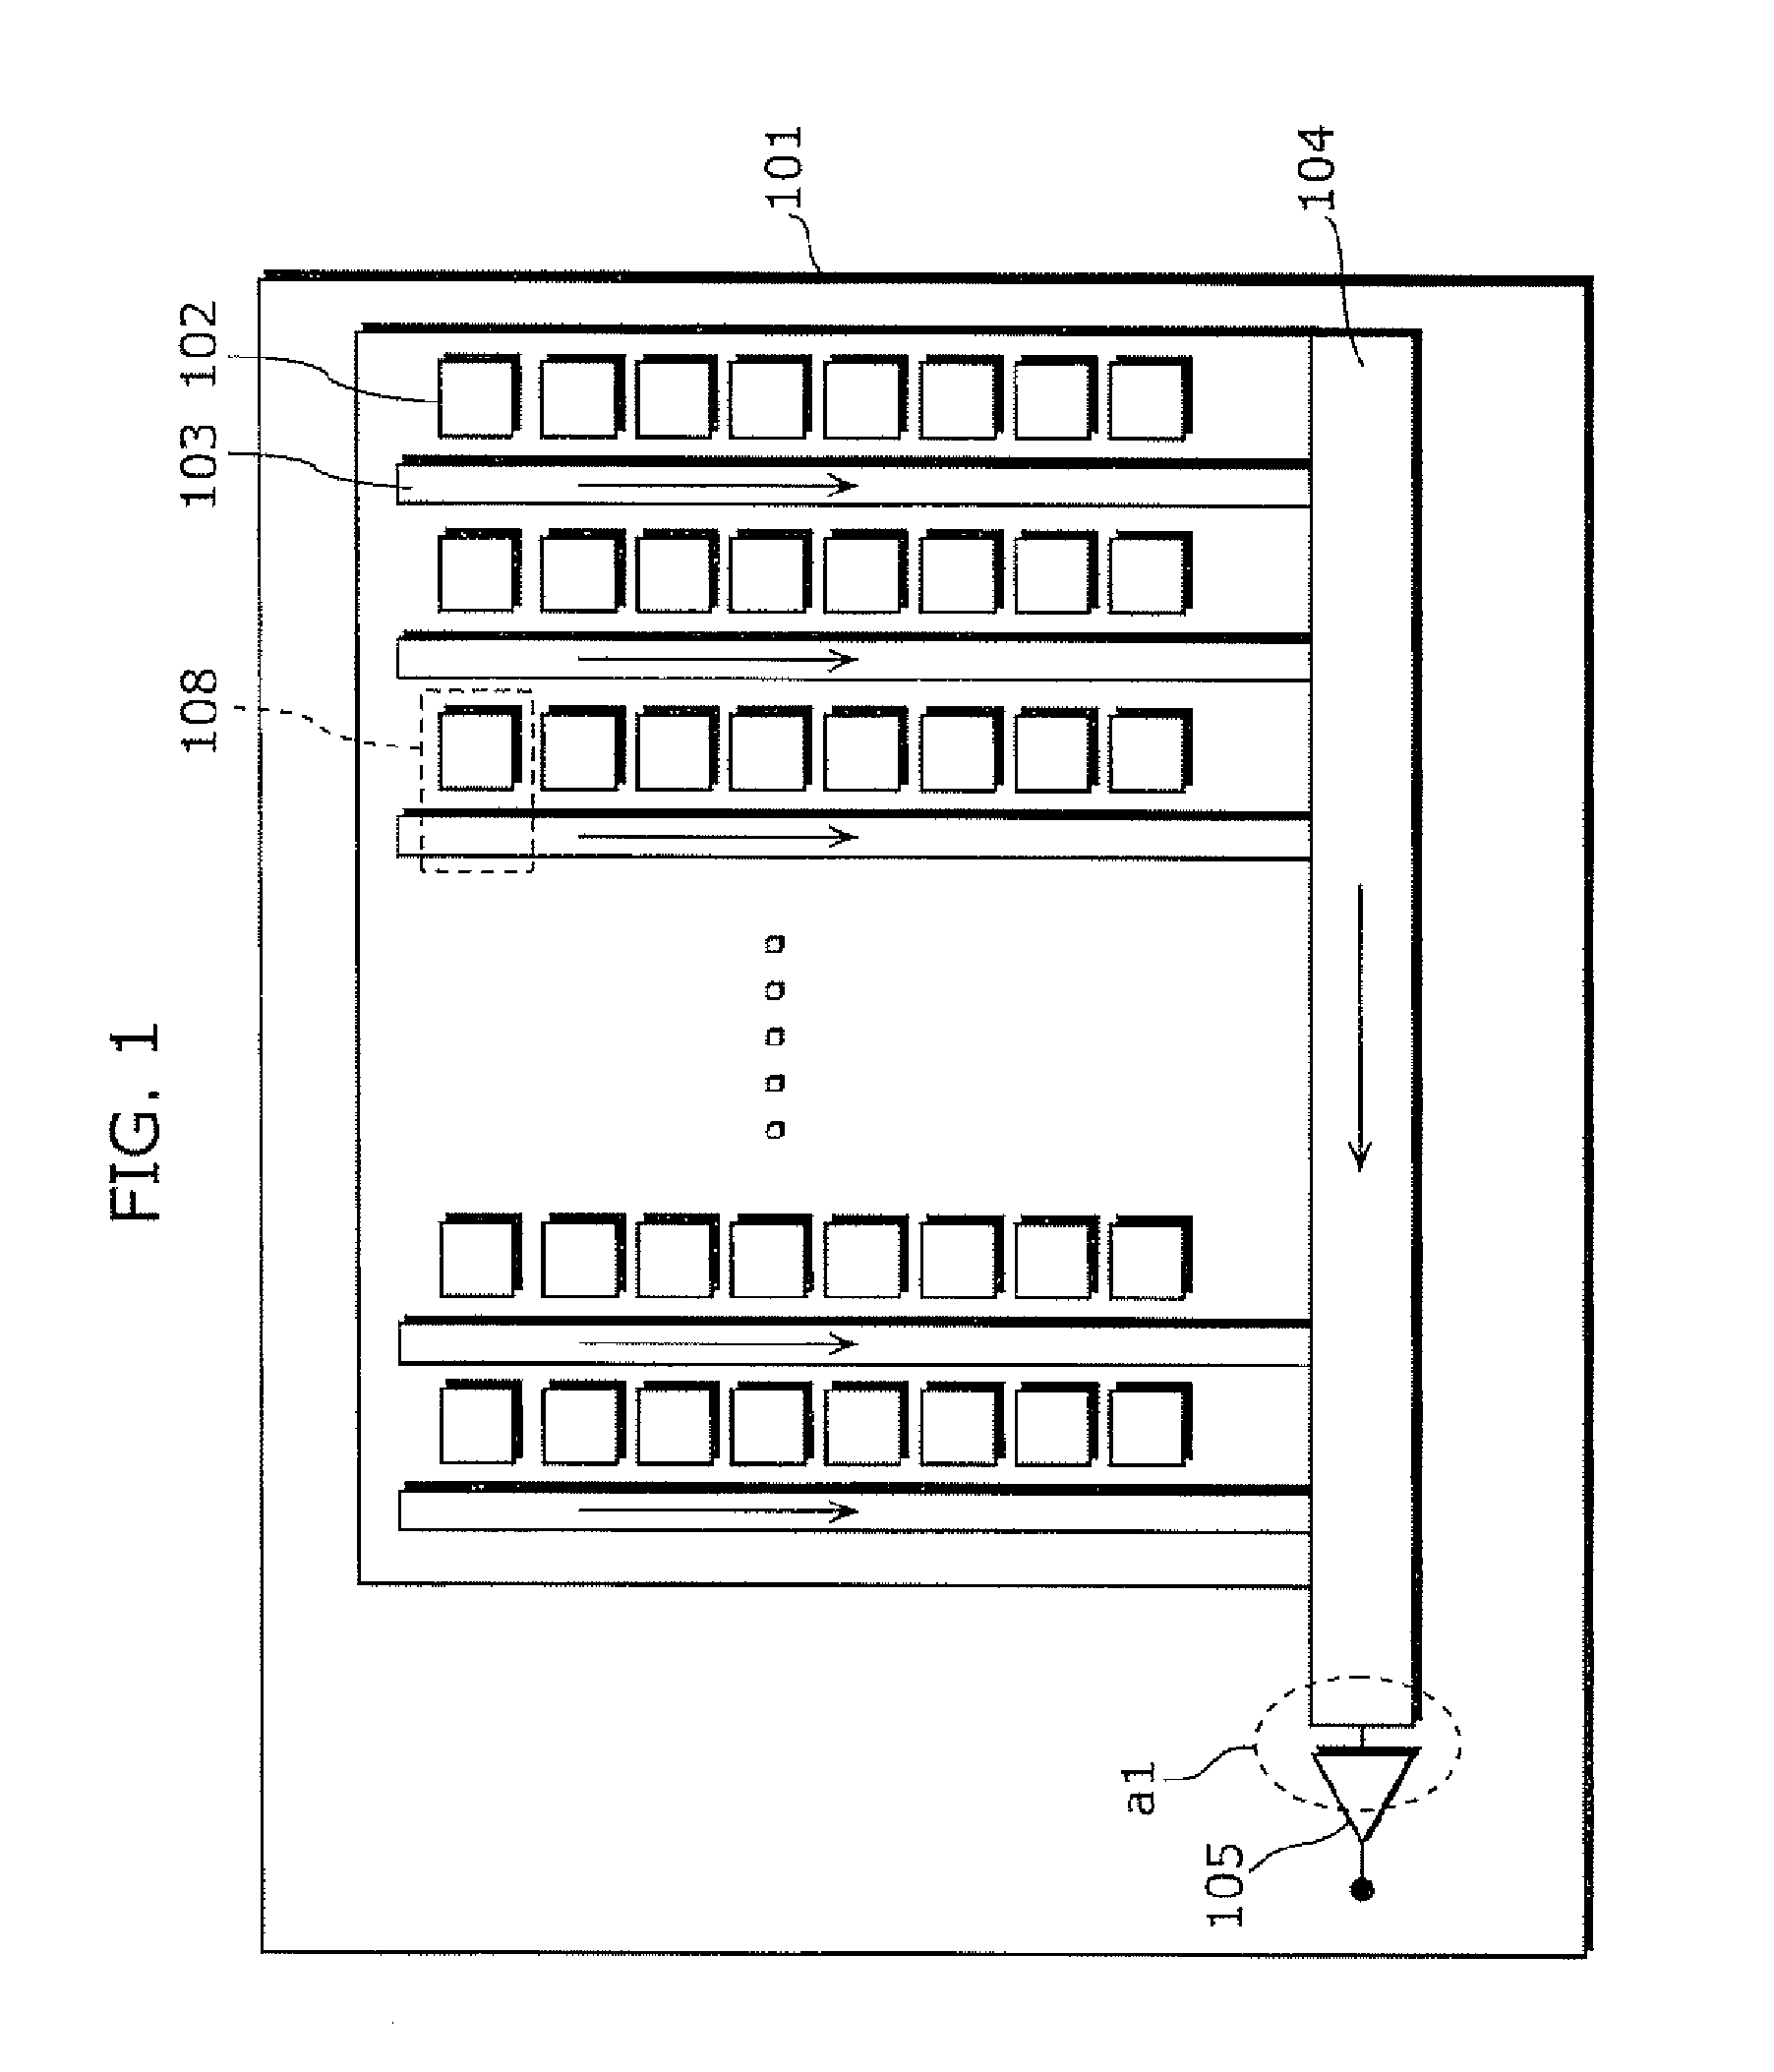 Solid-state imaging device, signal charge detection device, and camera